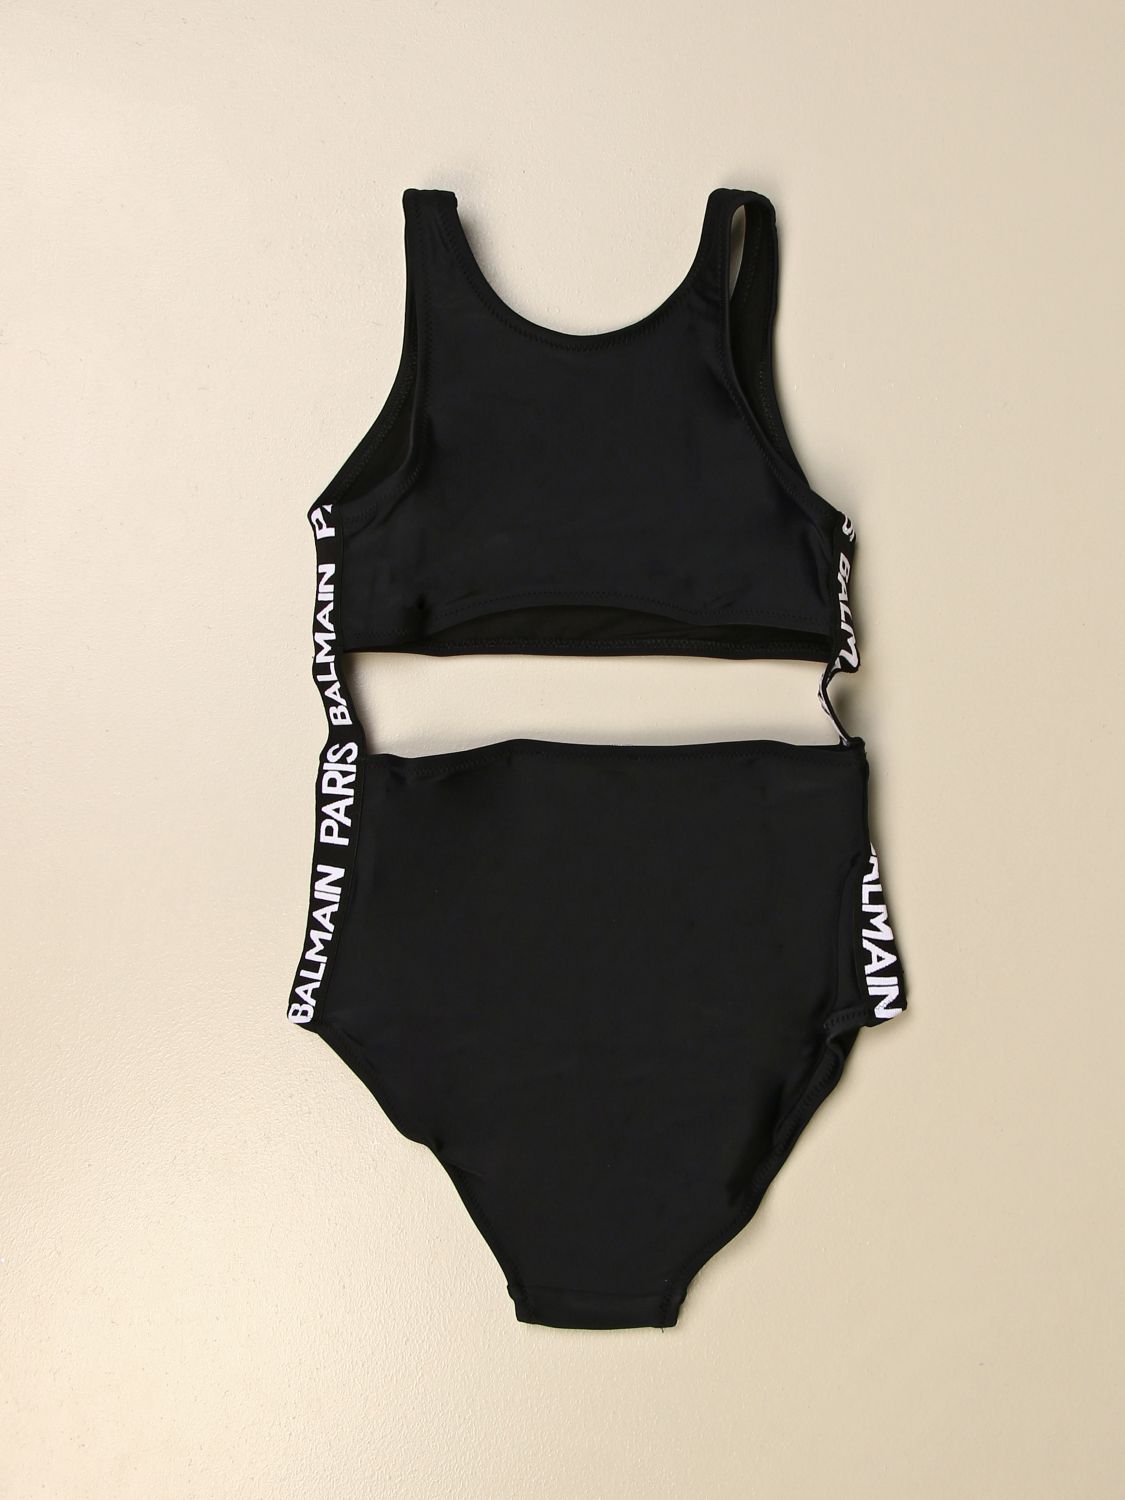 BALMAIN: one-piece swimsuit with logoed bands | Balmain Kids Black | Swimsuit Balmain 6M0029 MX400 GIGLIO.COM